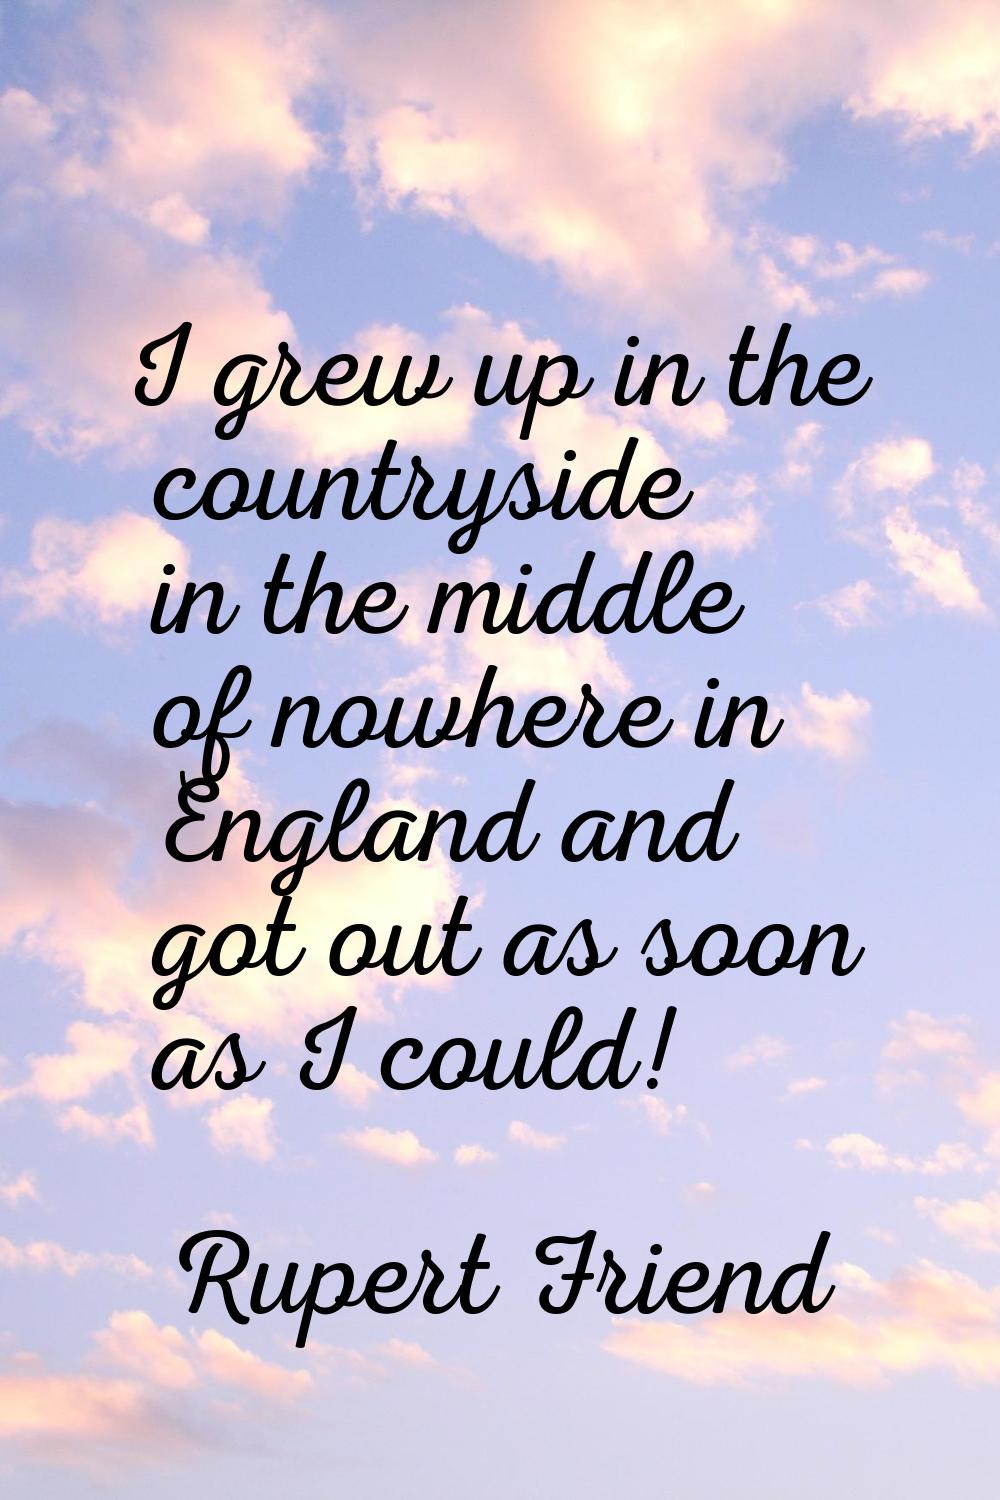 I grew up in the countryside in the middle of nowhere in England and got out as soon as I could!